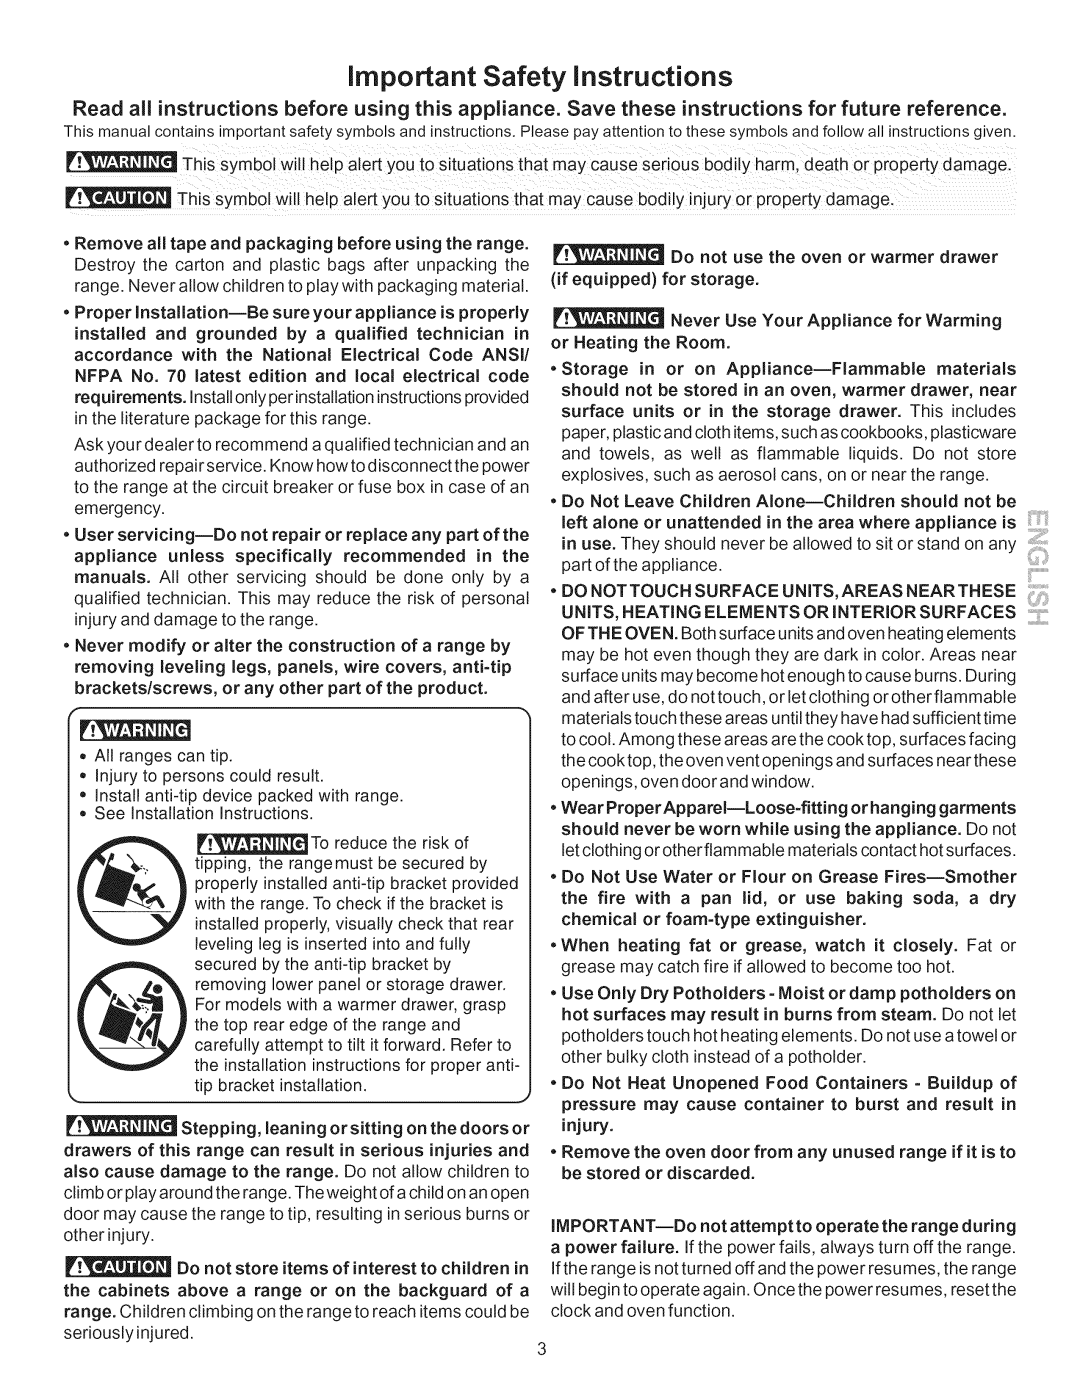 Kenmore 790.9662 manual important Safety instructions, injury 